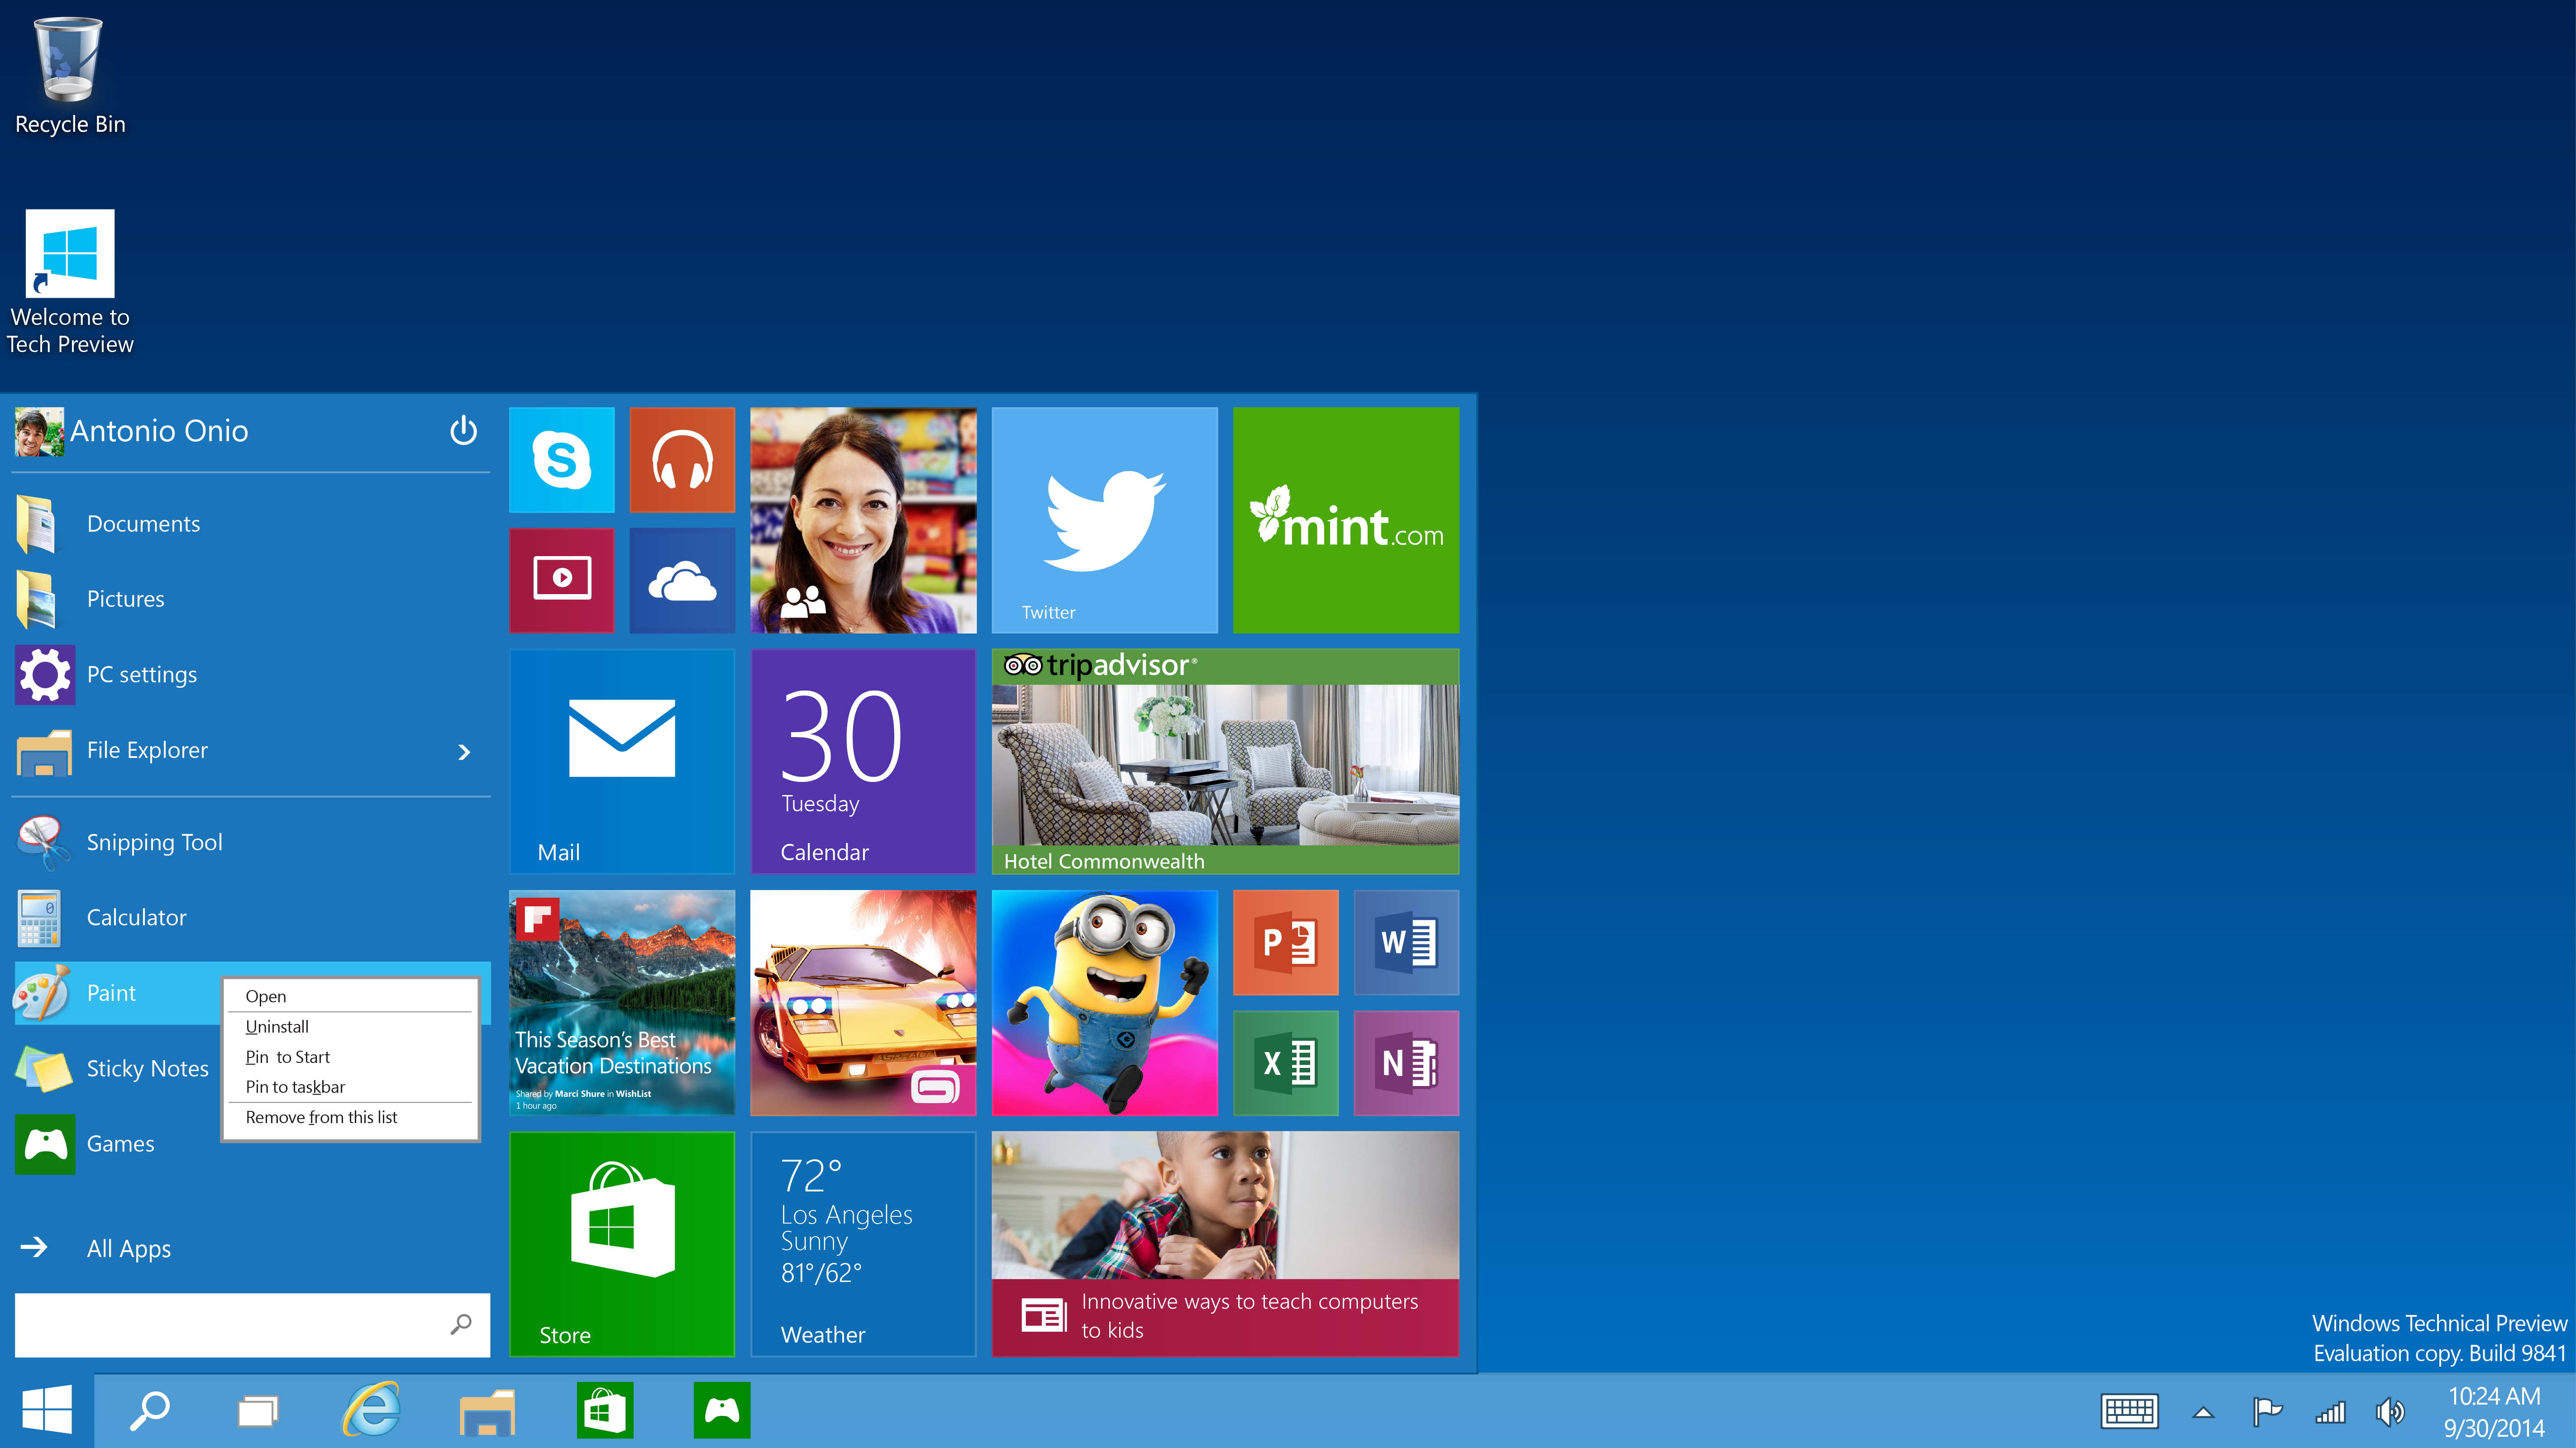 Windows 10 Software ecosystem–what will this be like?